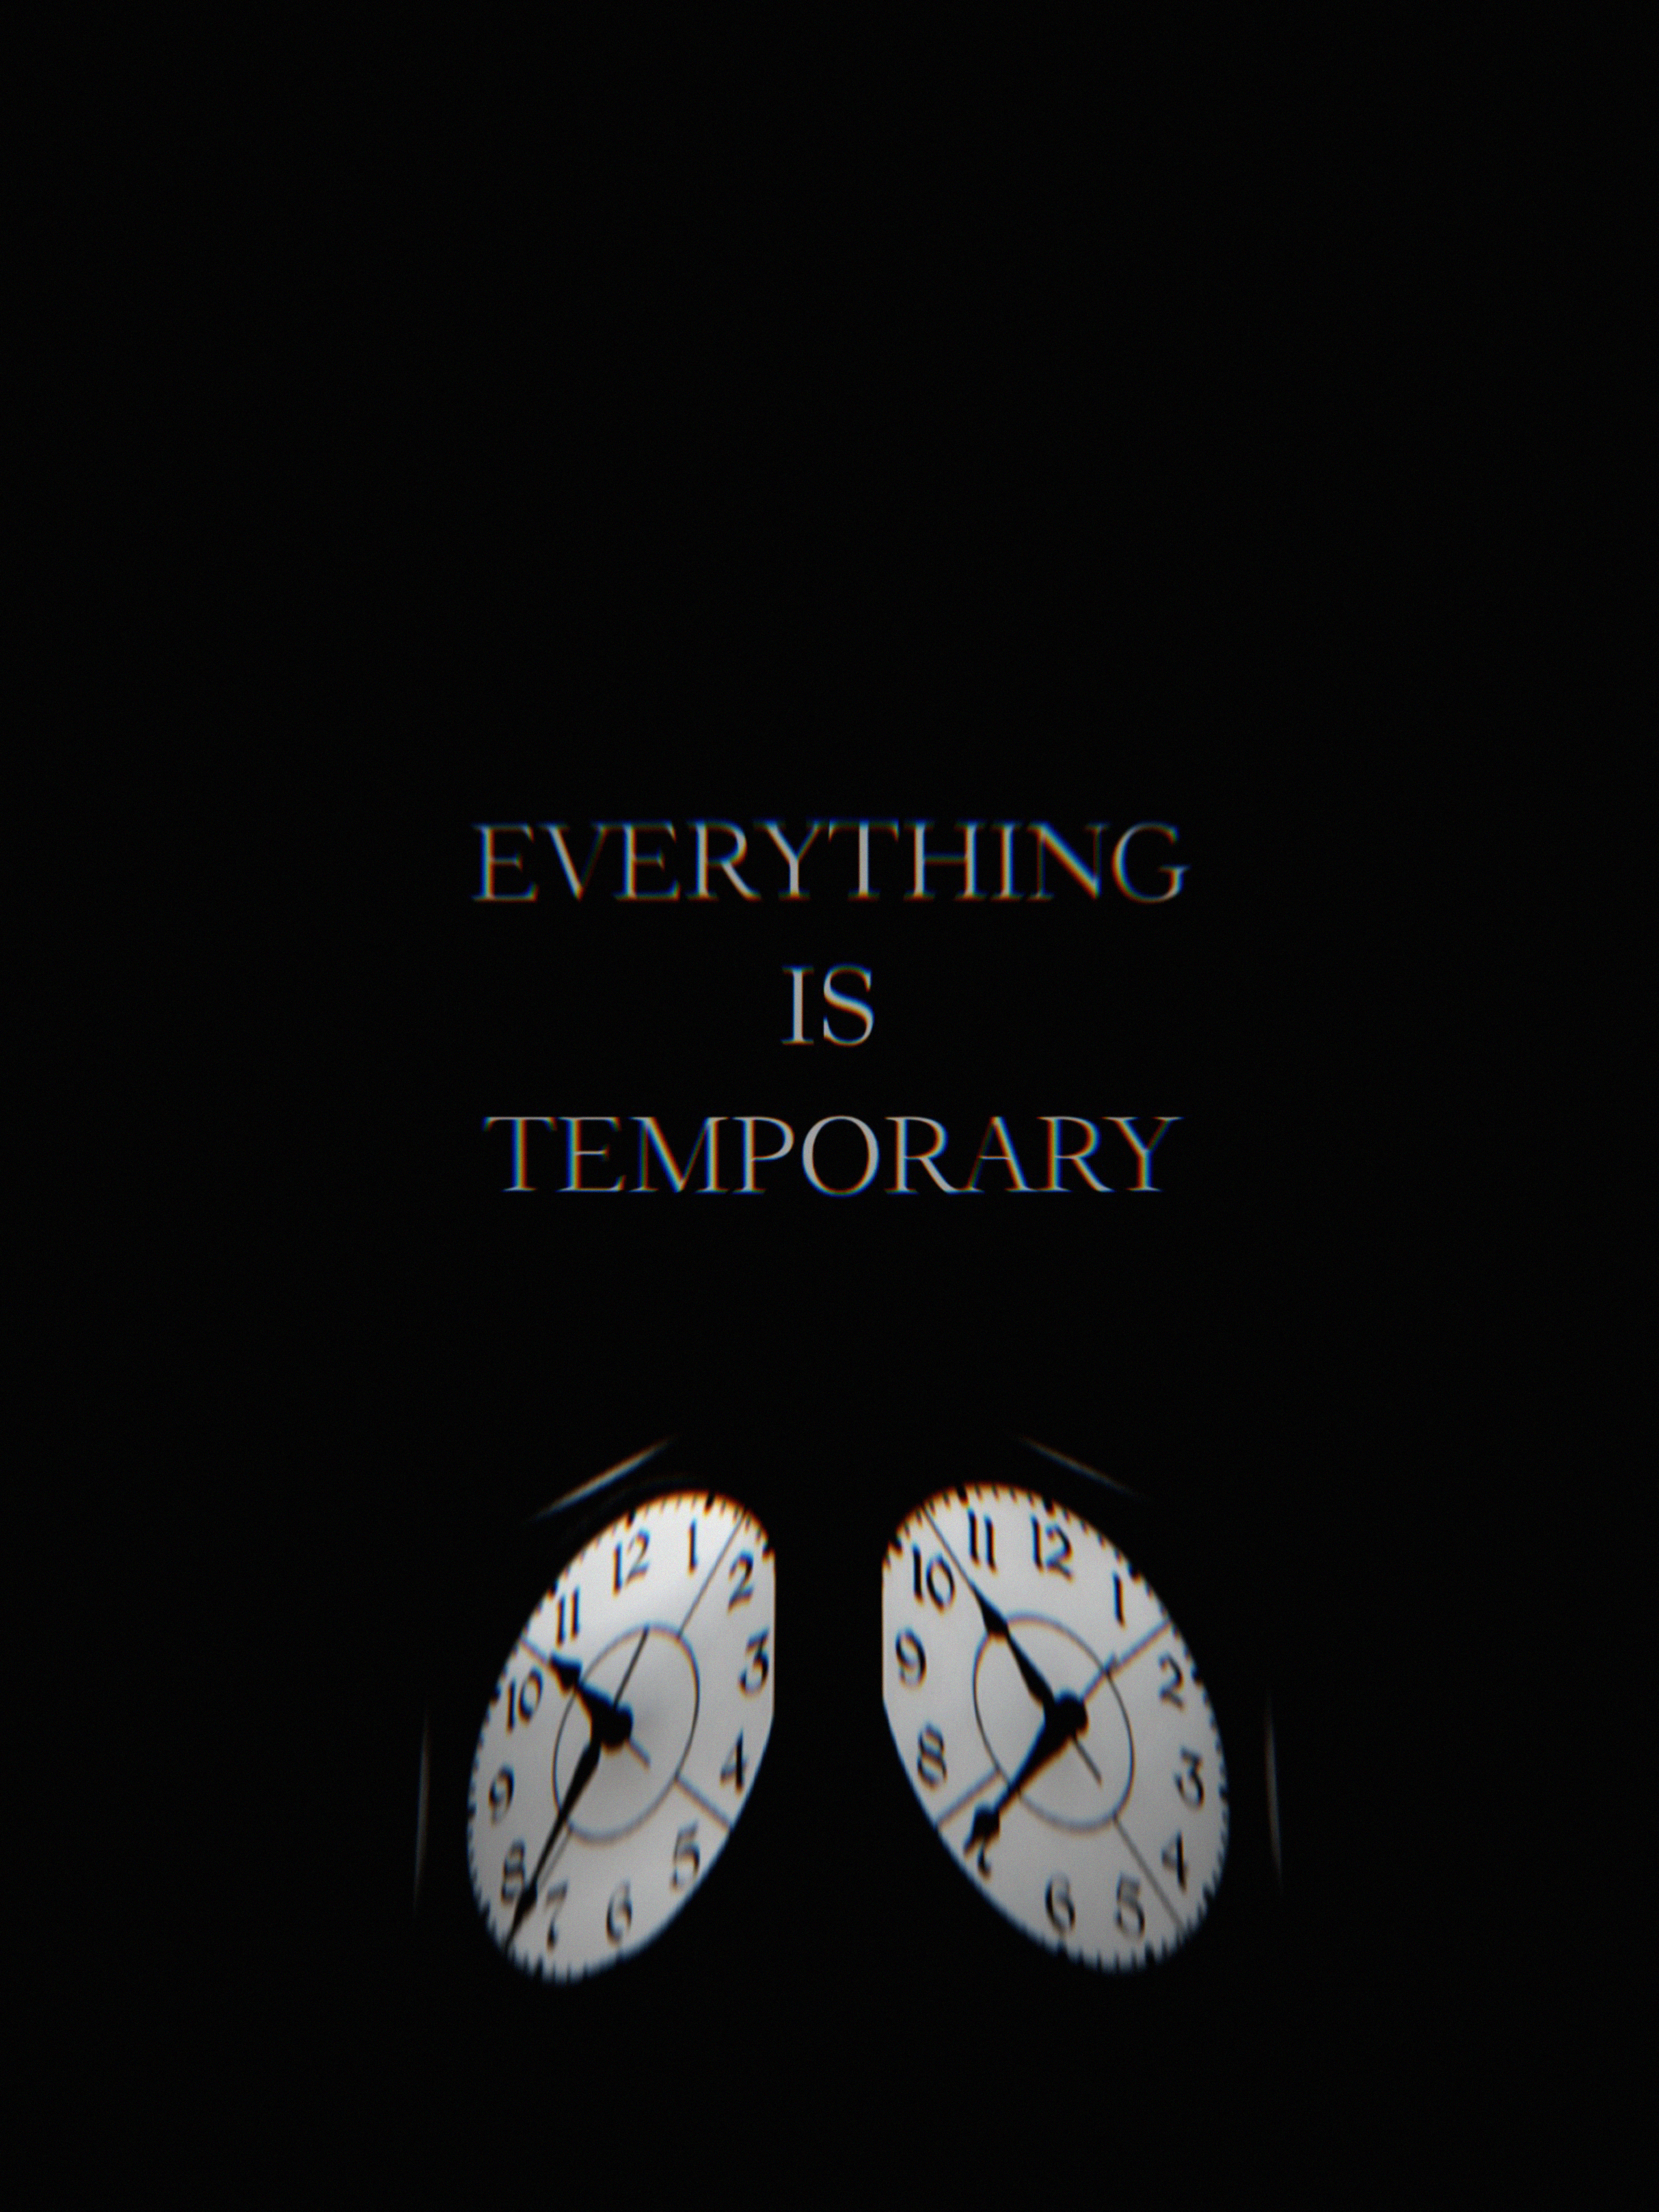 life, clock, words, glitch, time, it's time, temporary cellphone